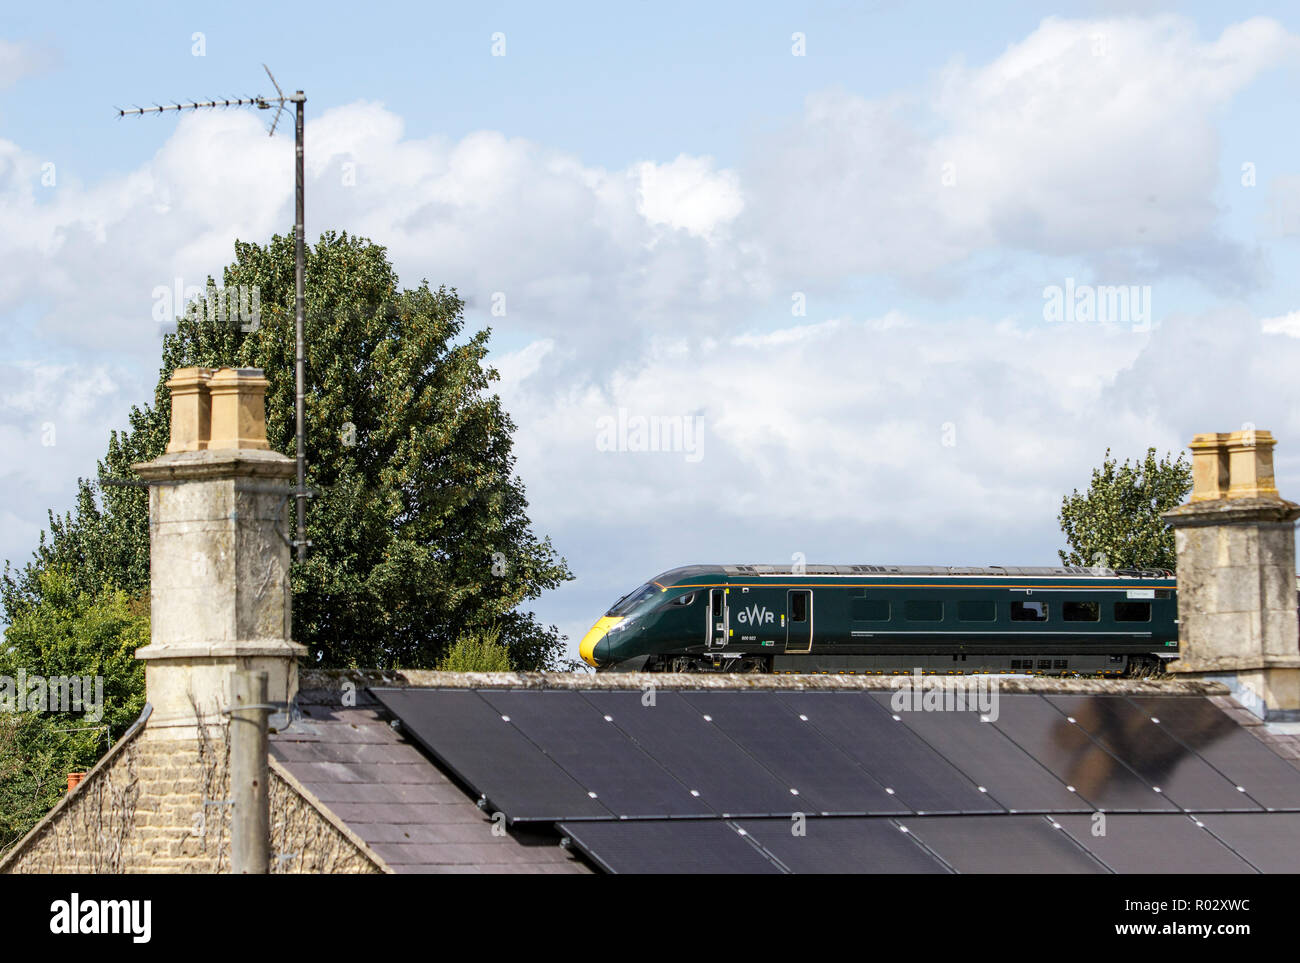 Great Western Railways Hitachi Class 800 800022 Diesel electric super express train is photographed on the railway line between Bath and Chippenham Stock Photo